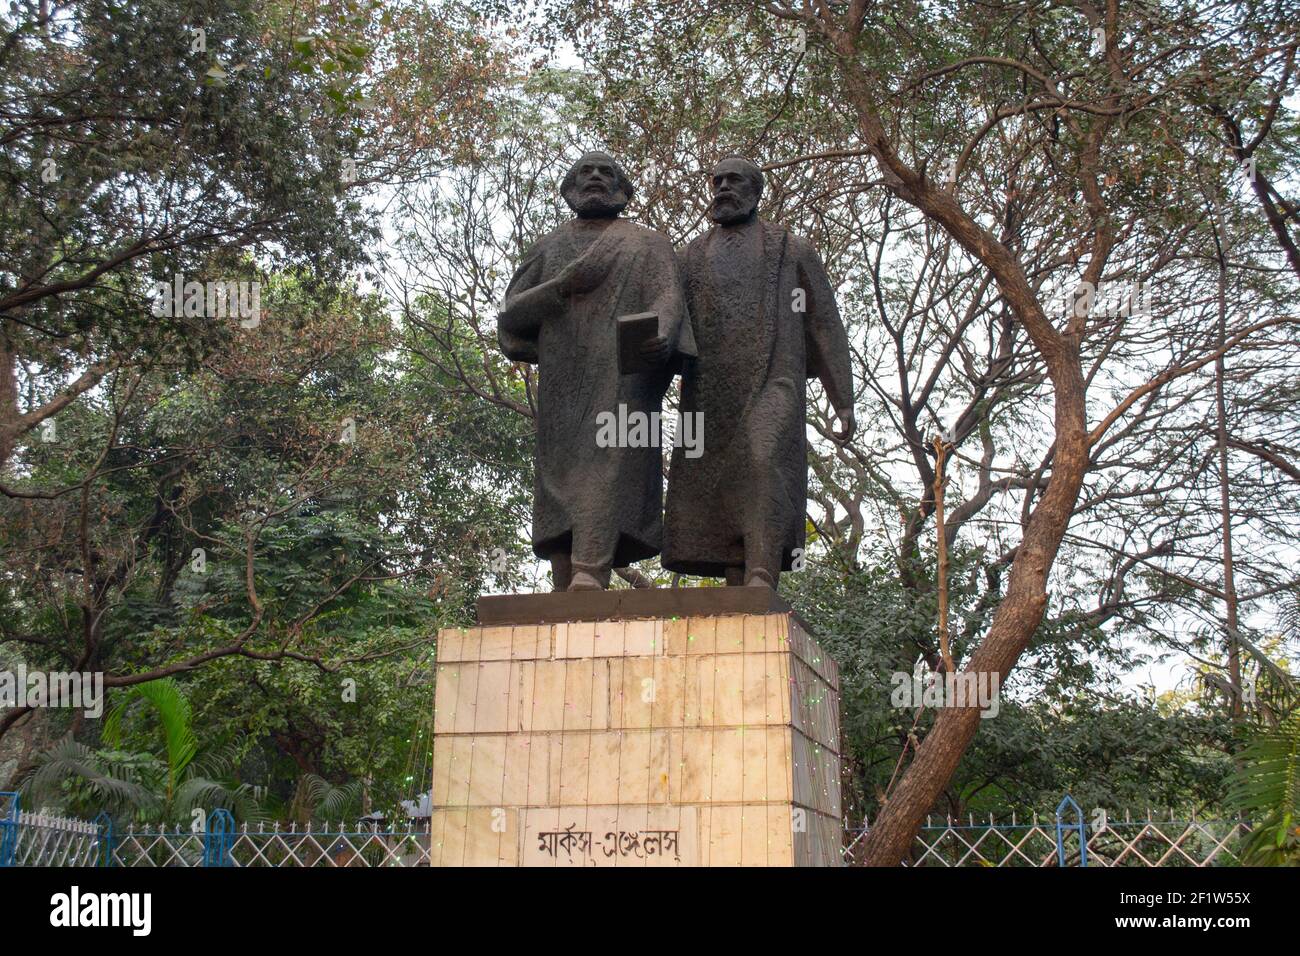 Kolkata, India - January 13, 2015: a monument to Karl Marx and Friedrich Engels in Curzon Park. Stock Photo